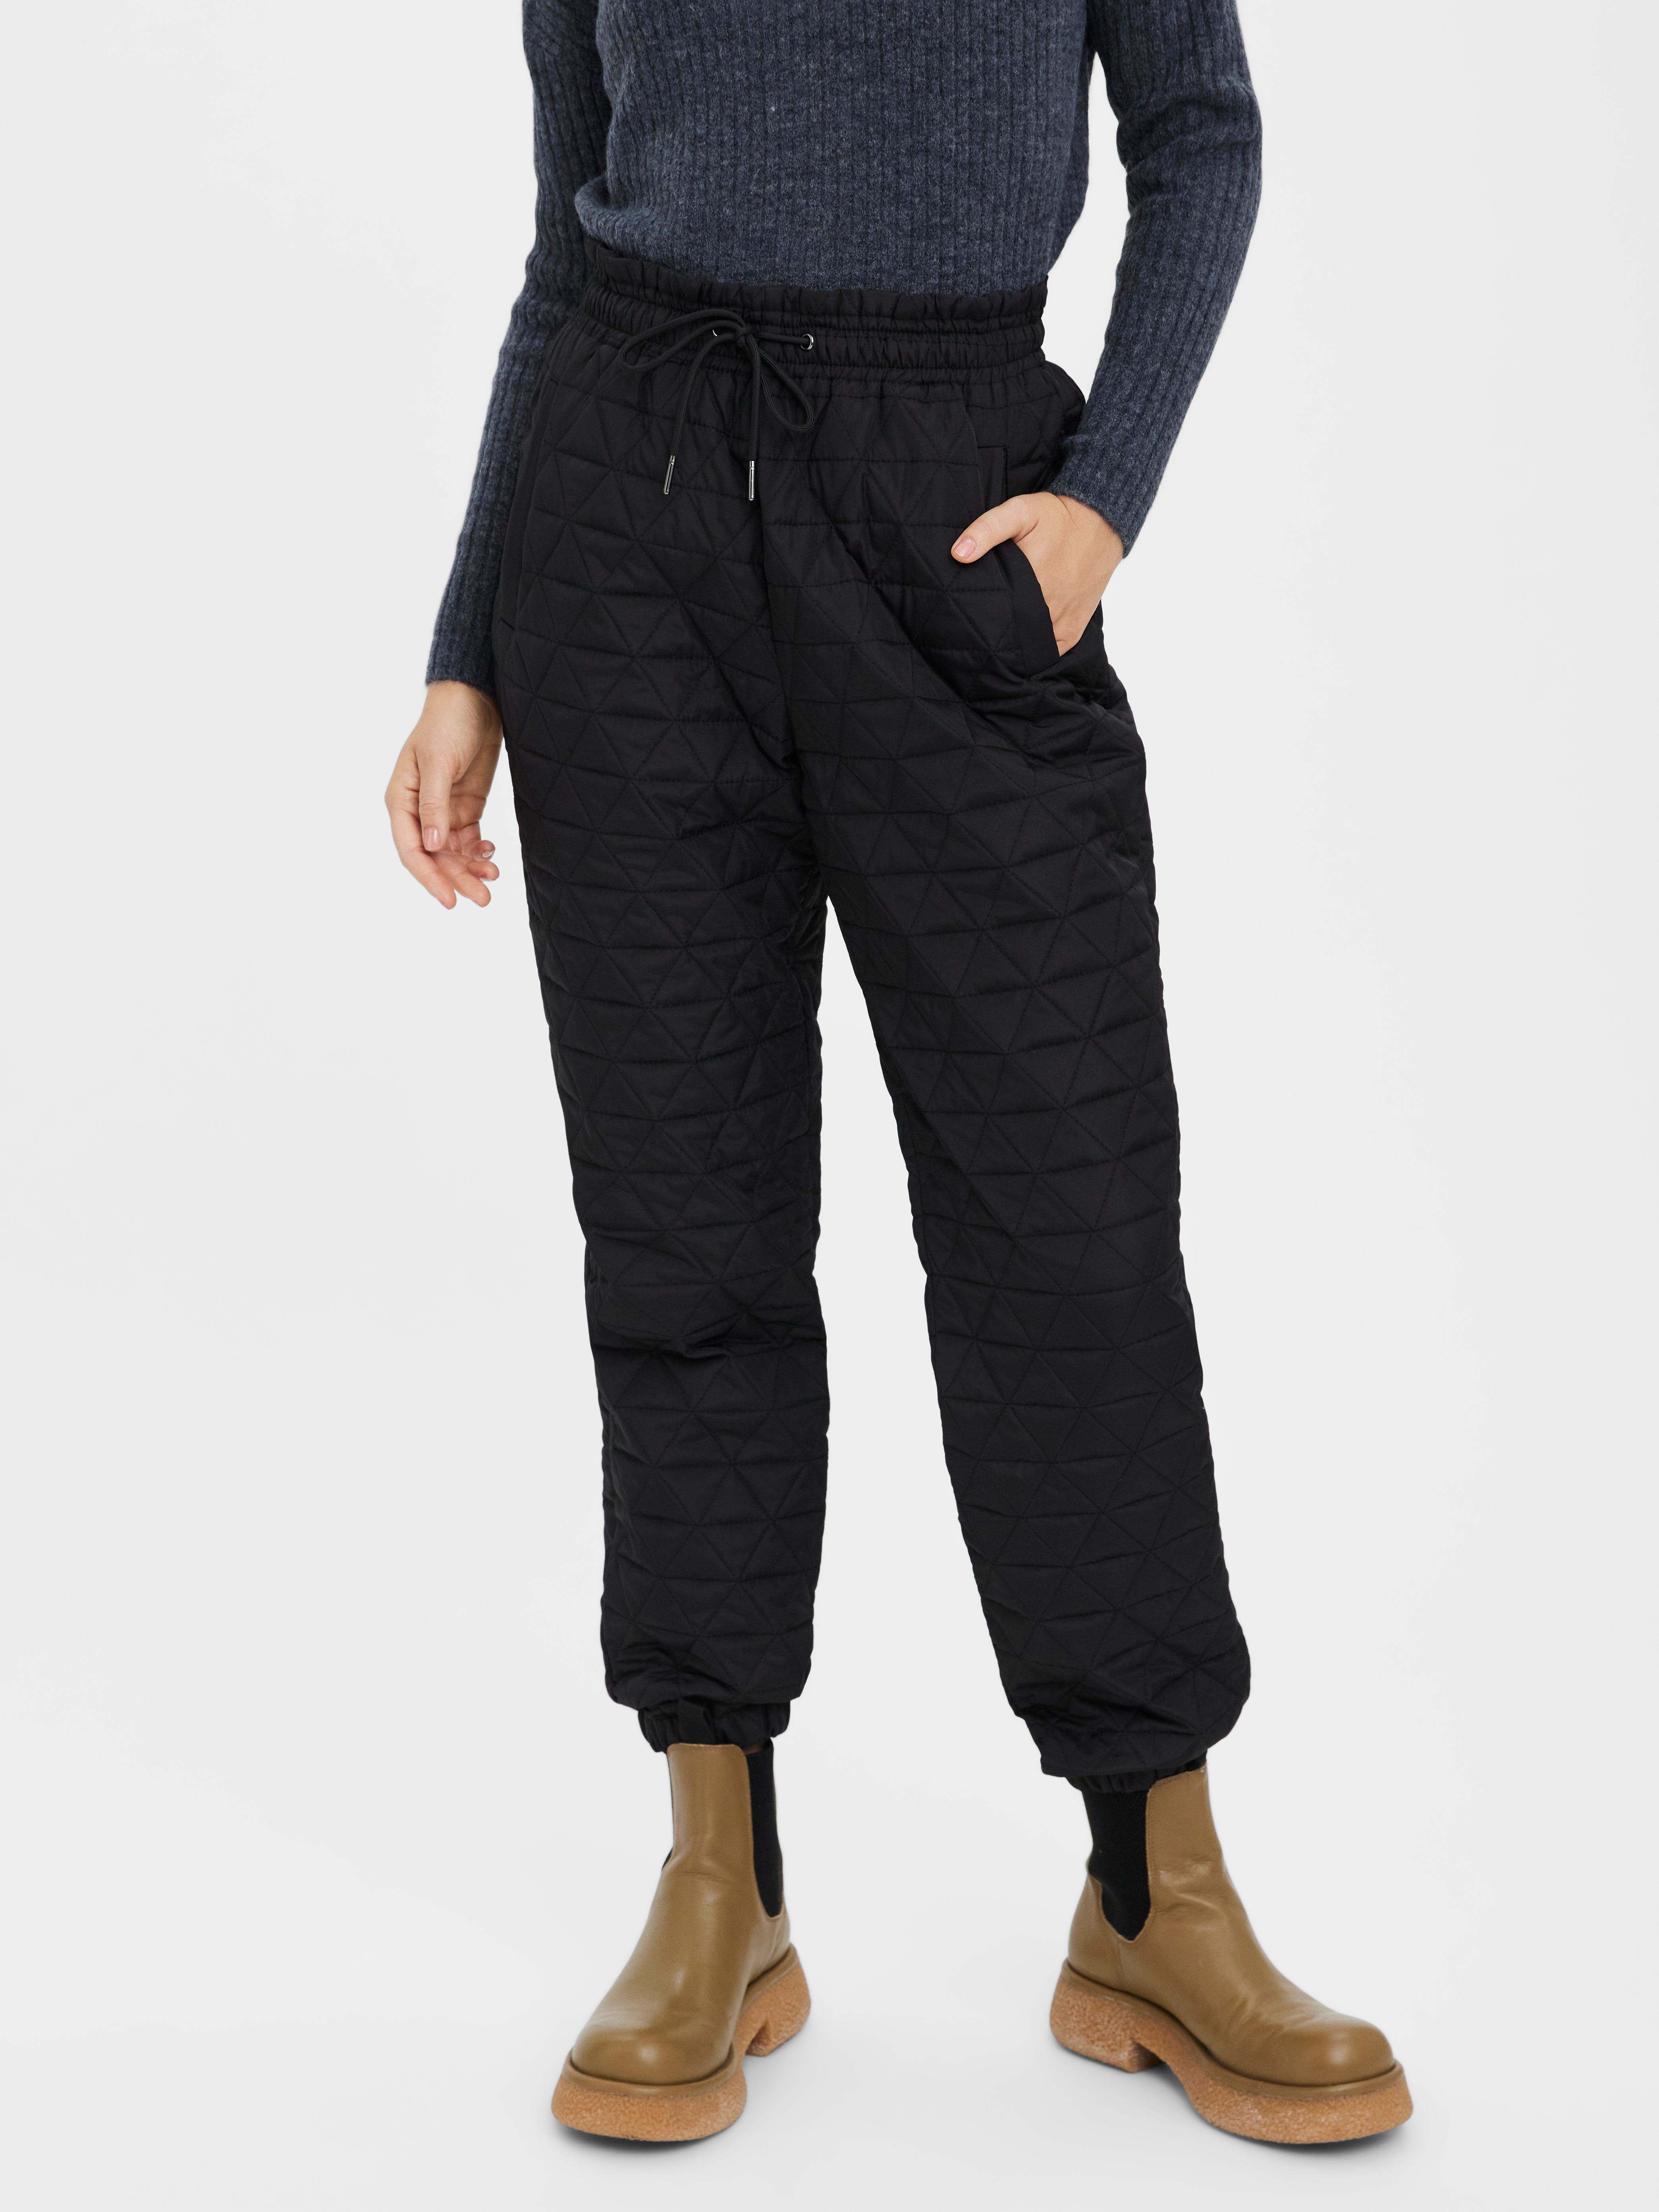 SomethingNew x NAOMI ANWER Loose fit Trousers with 30 discount  Vero Moda 